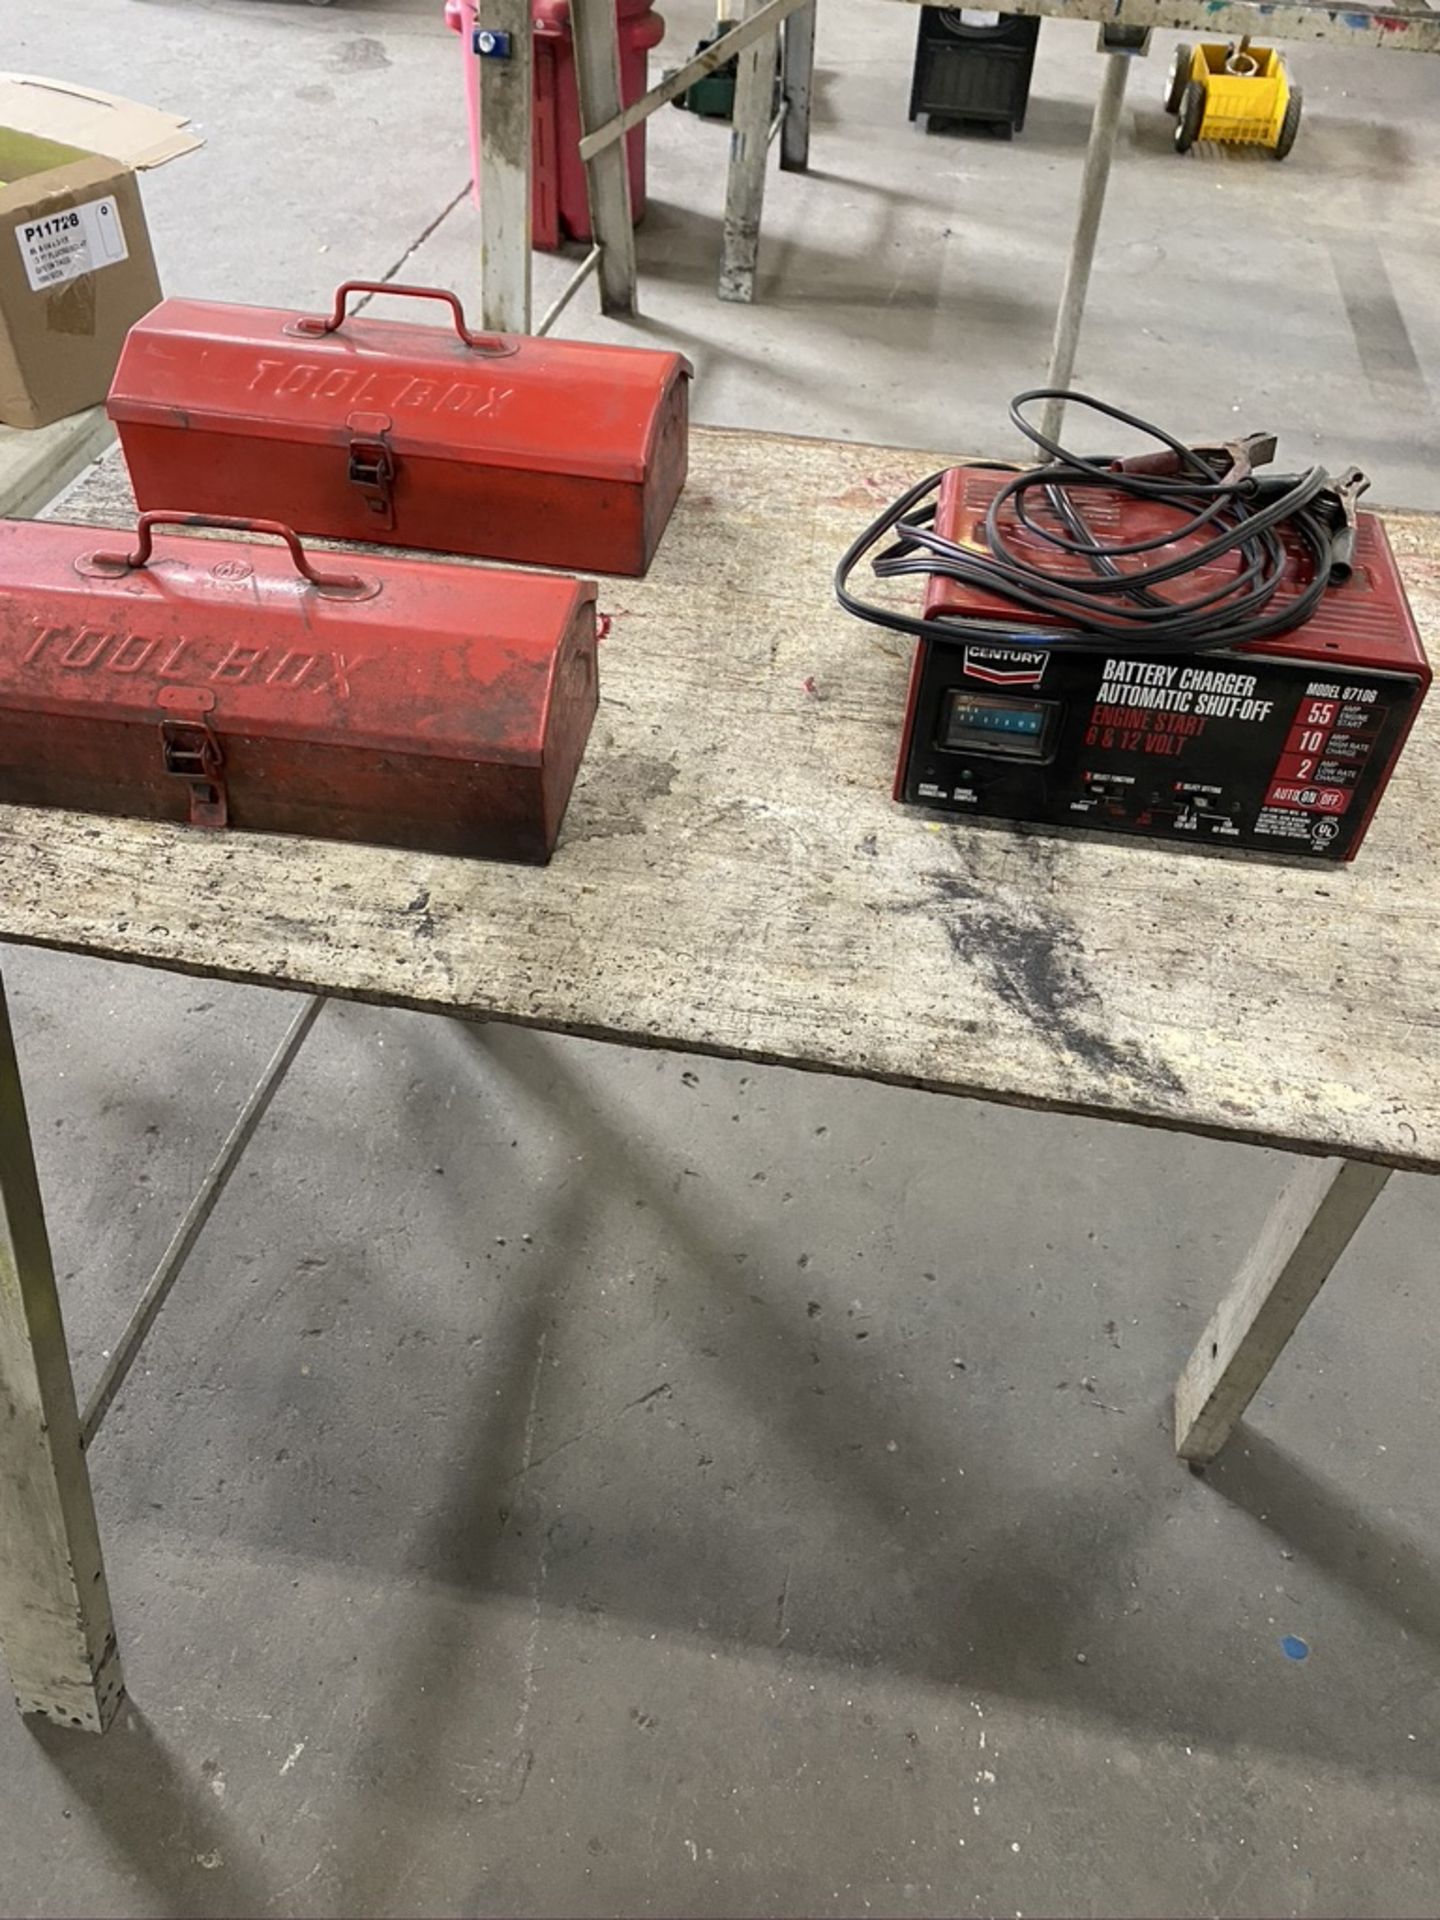 Lot of (2) tool box's , century battery charger,misc box of parts bins,helicoils - Image 3 of 3